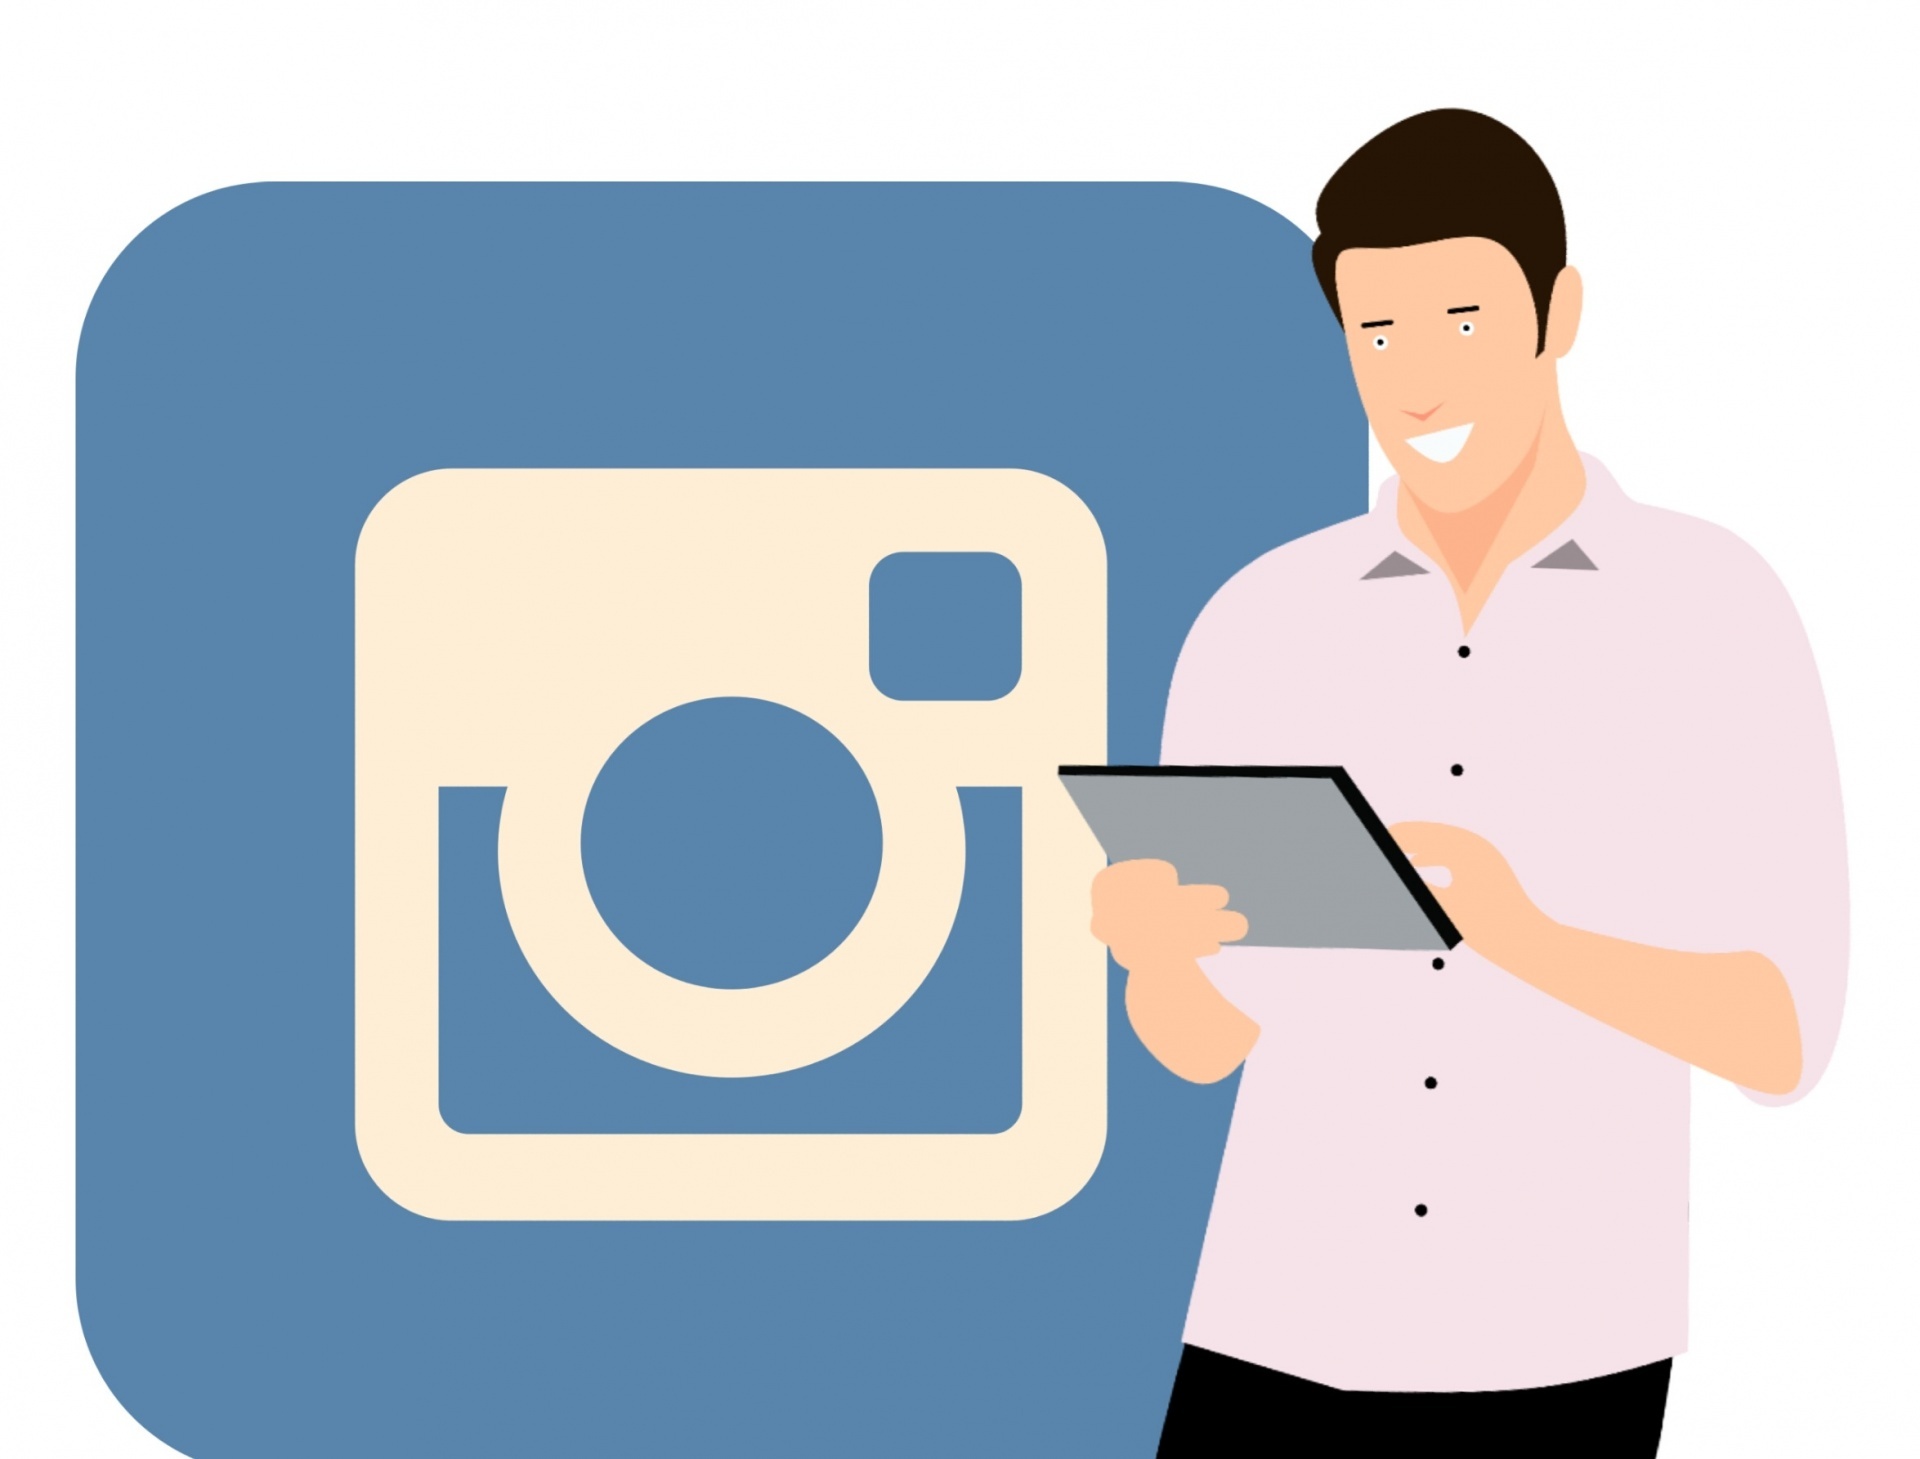 Engaging Your Instagram Audience